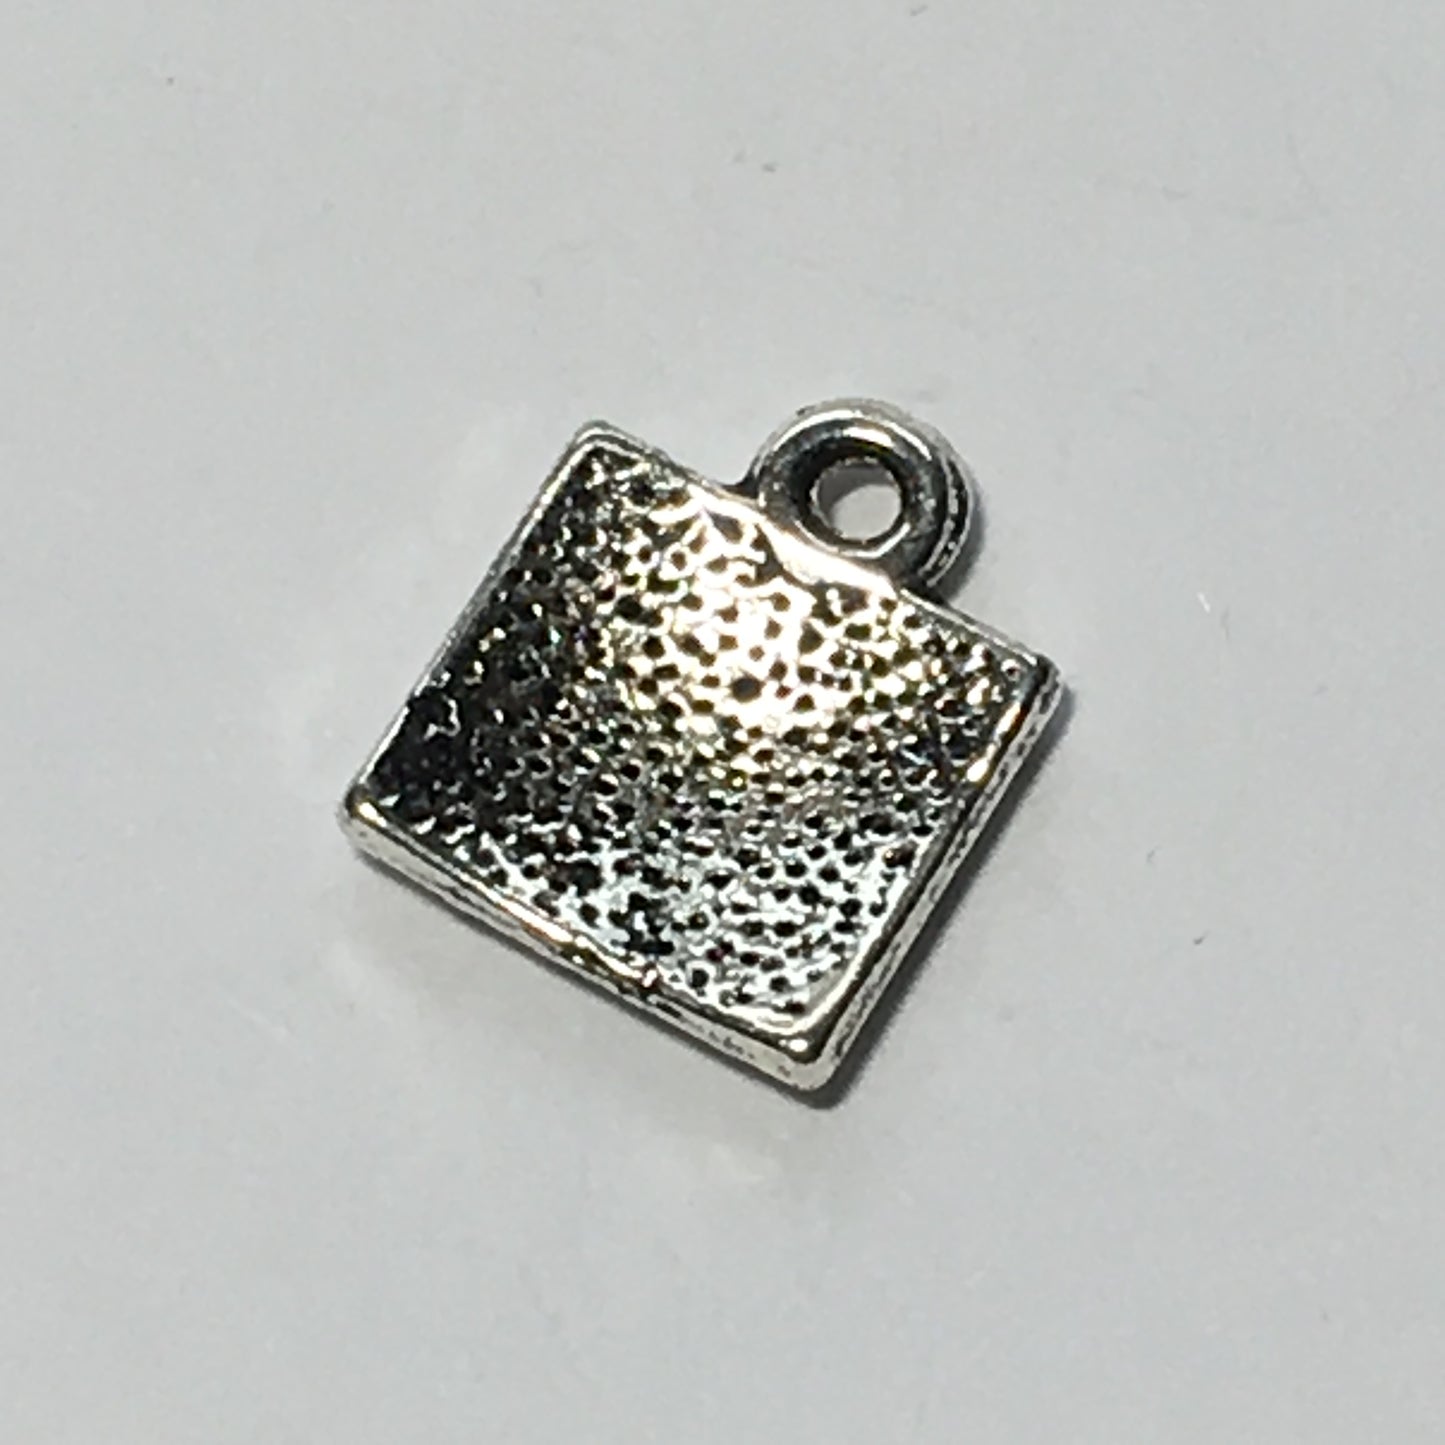 Antique Silver Square Heart Charm, 11 x 9 mm